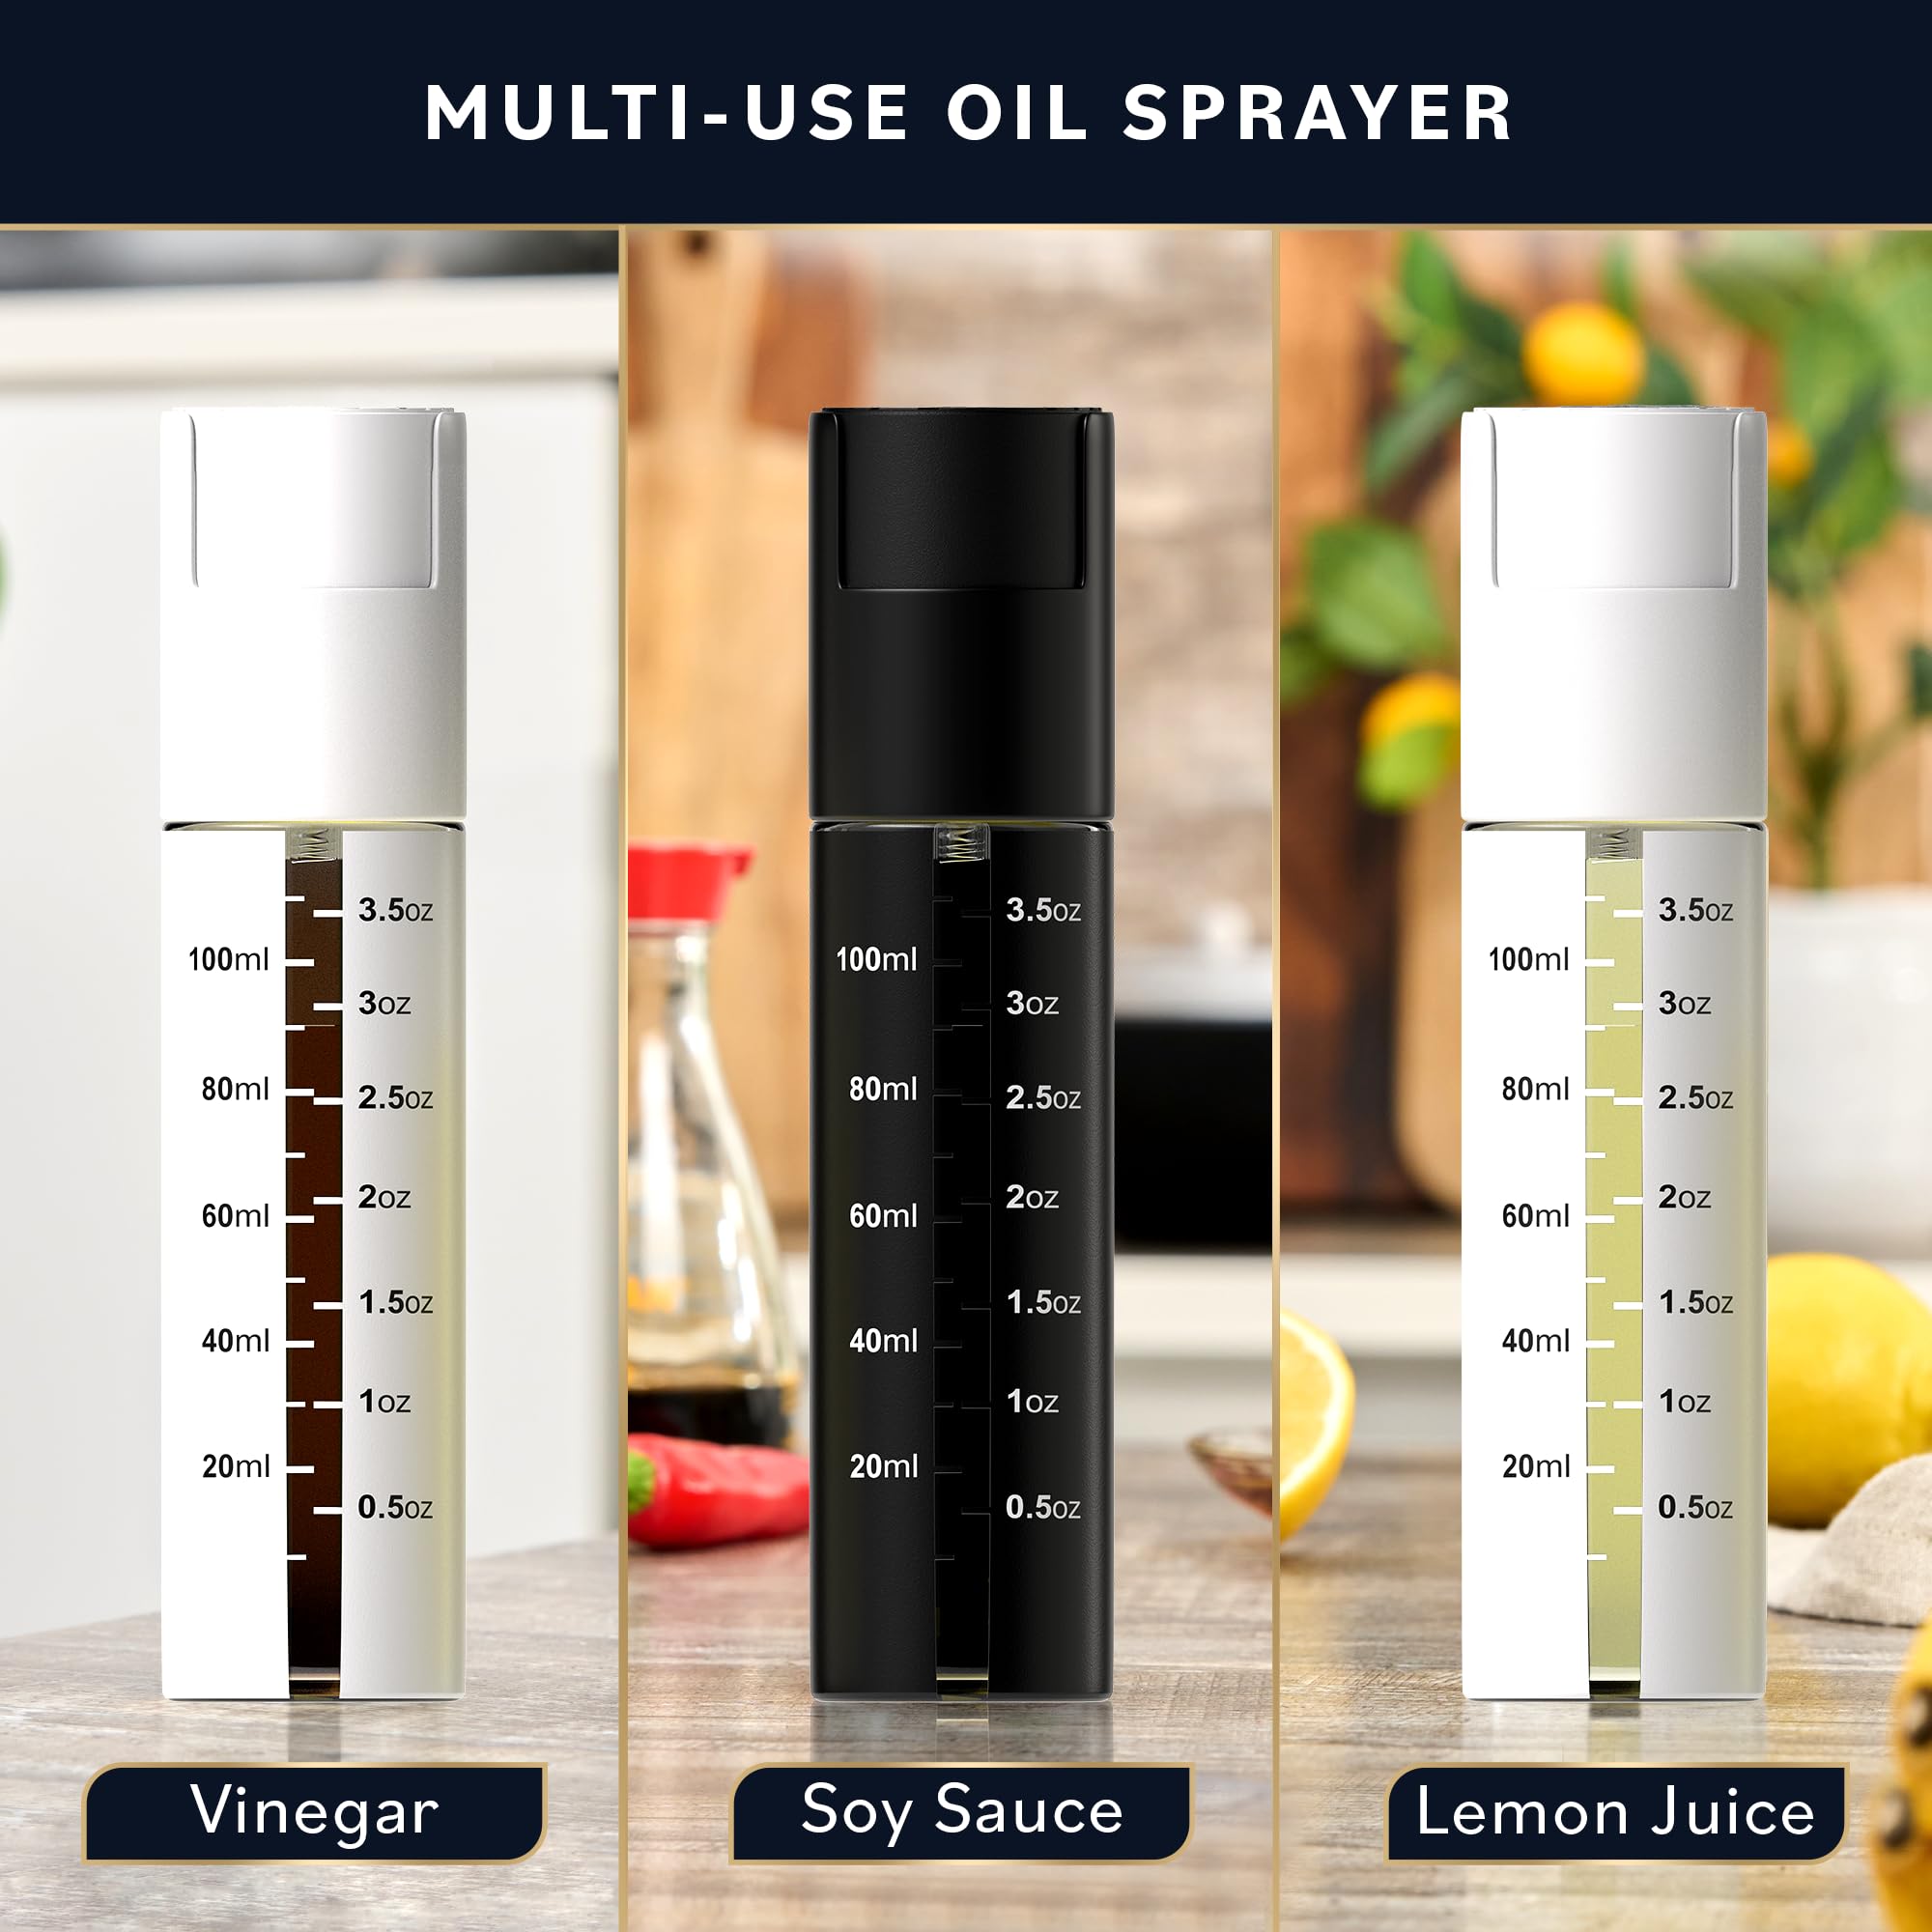 Home Hero 2 Pcs Oil Sprayer for Cooking - 120 ml Olive Oil Sprayer for Cooking - Olive Oil Spray Bottle for Cooking with Funnel & Cleaning Brush (Black & White Oil Spray)